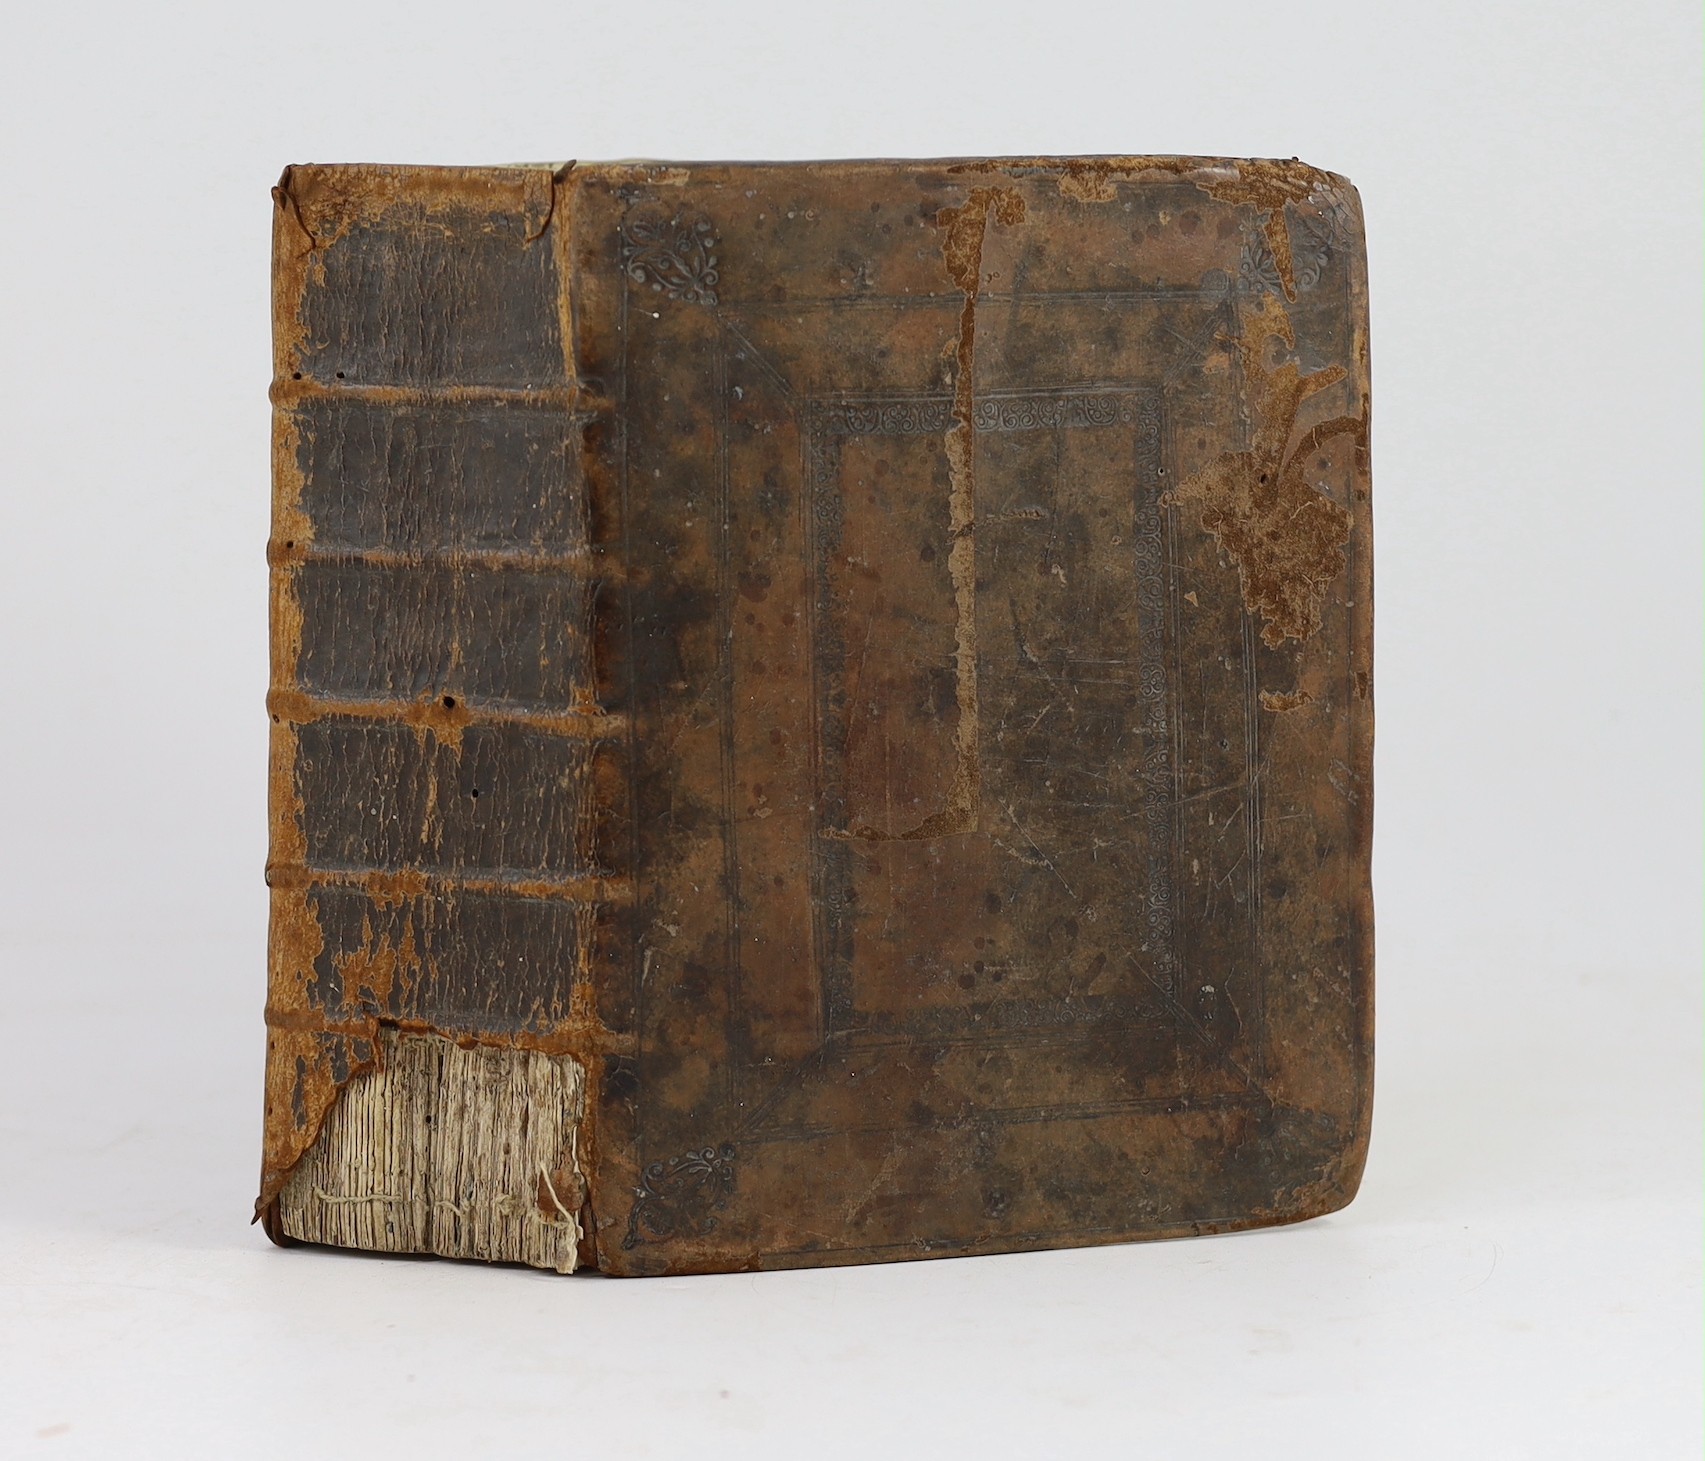 [The Bible - Authorised Version, 1633] The Holy Bible, containing the Old Testament and the New ... pictorial engraved general title (that for the N.T. damaged with loss)